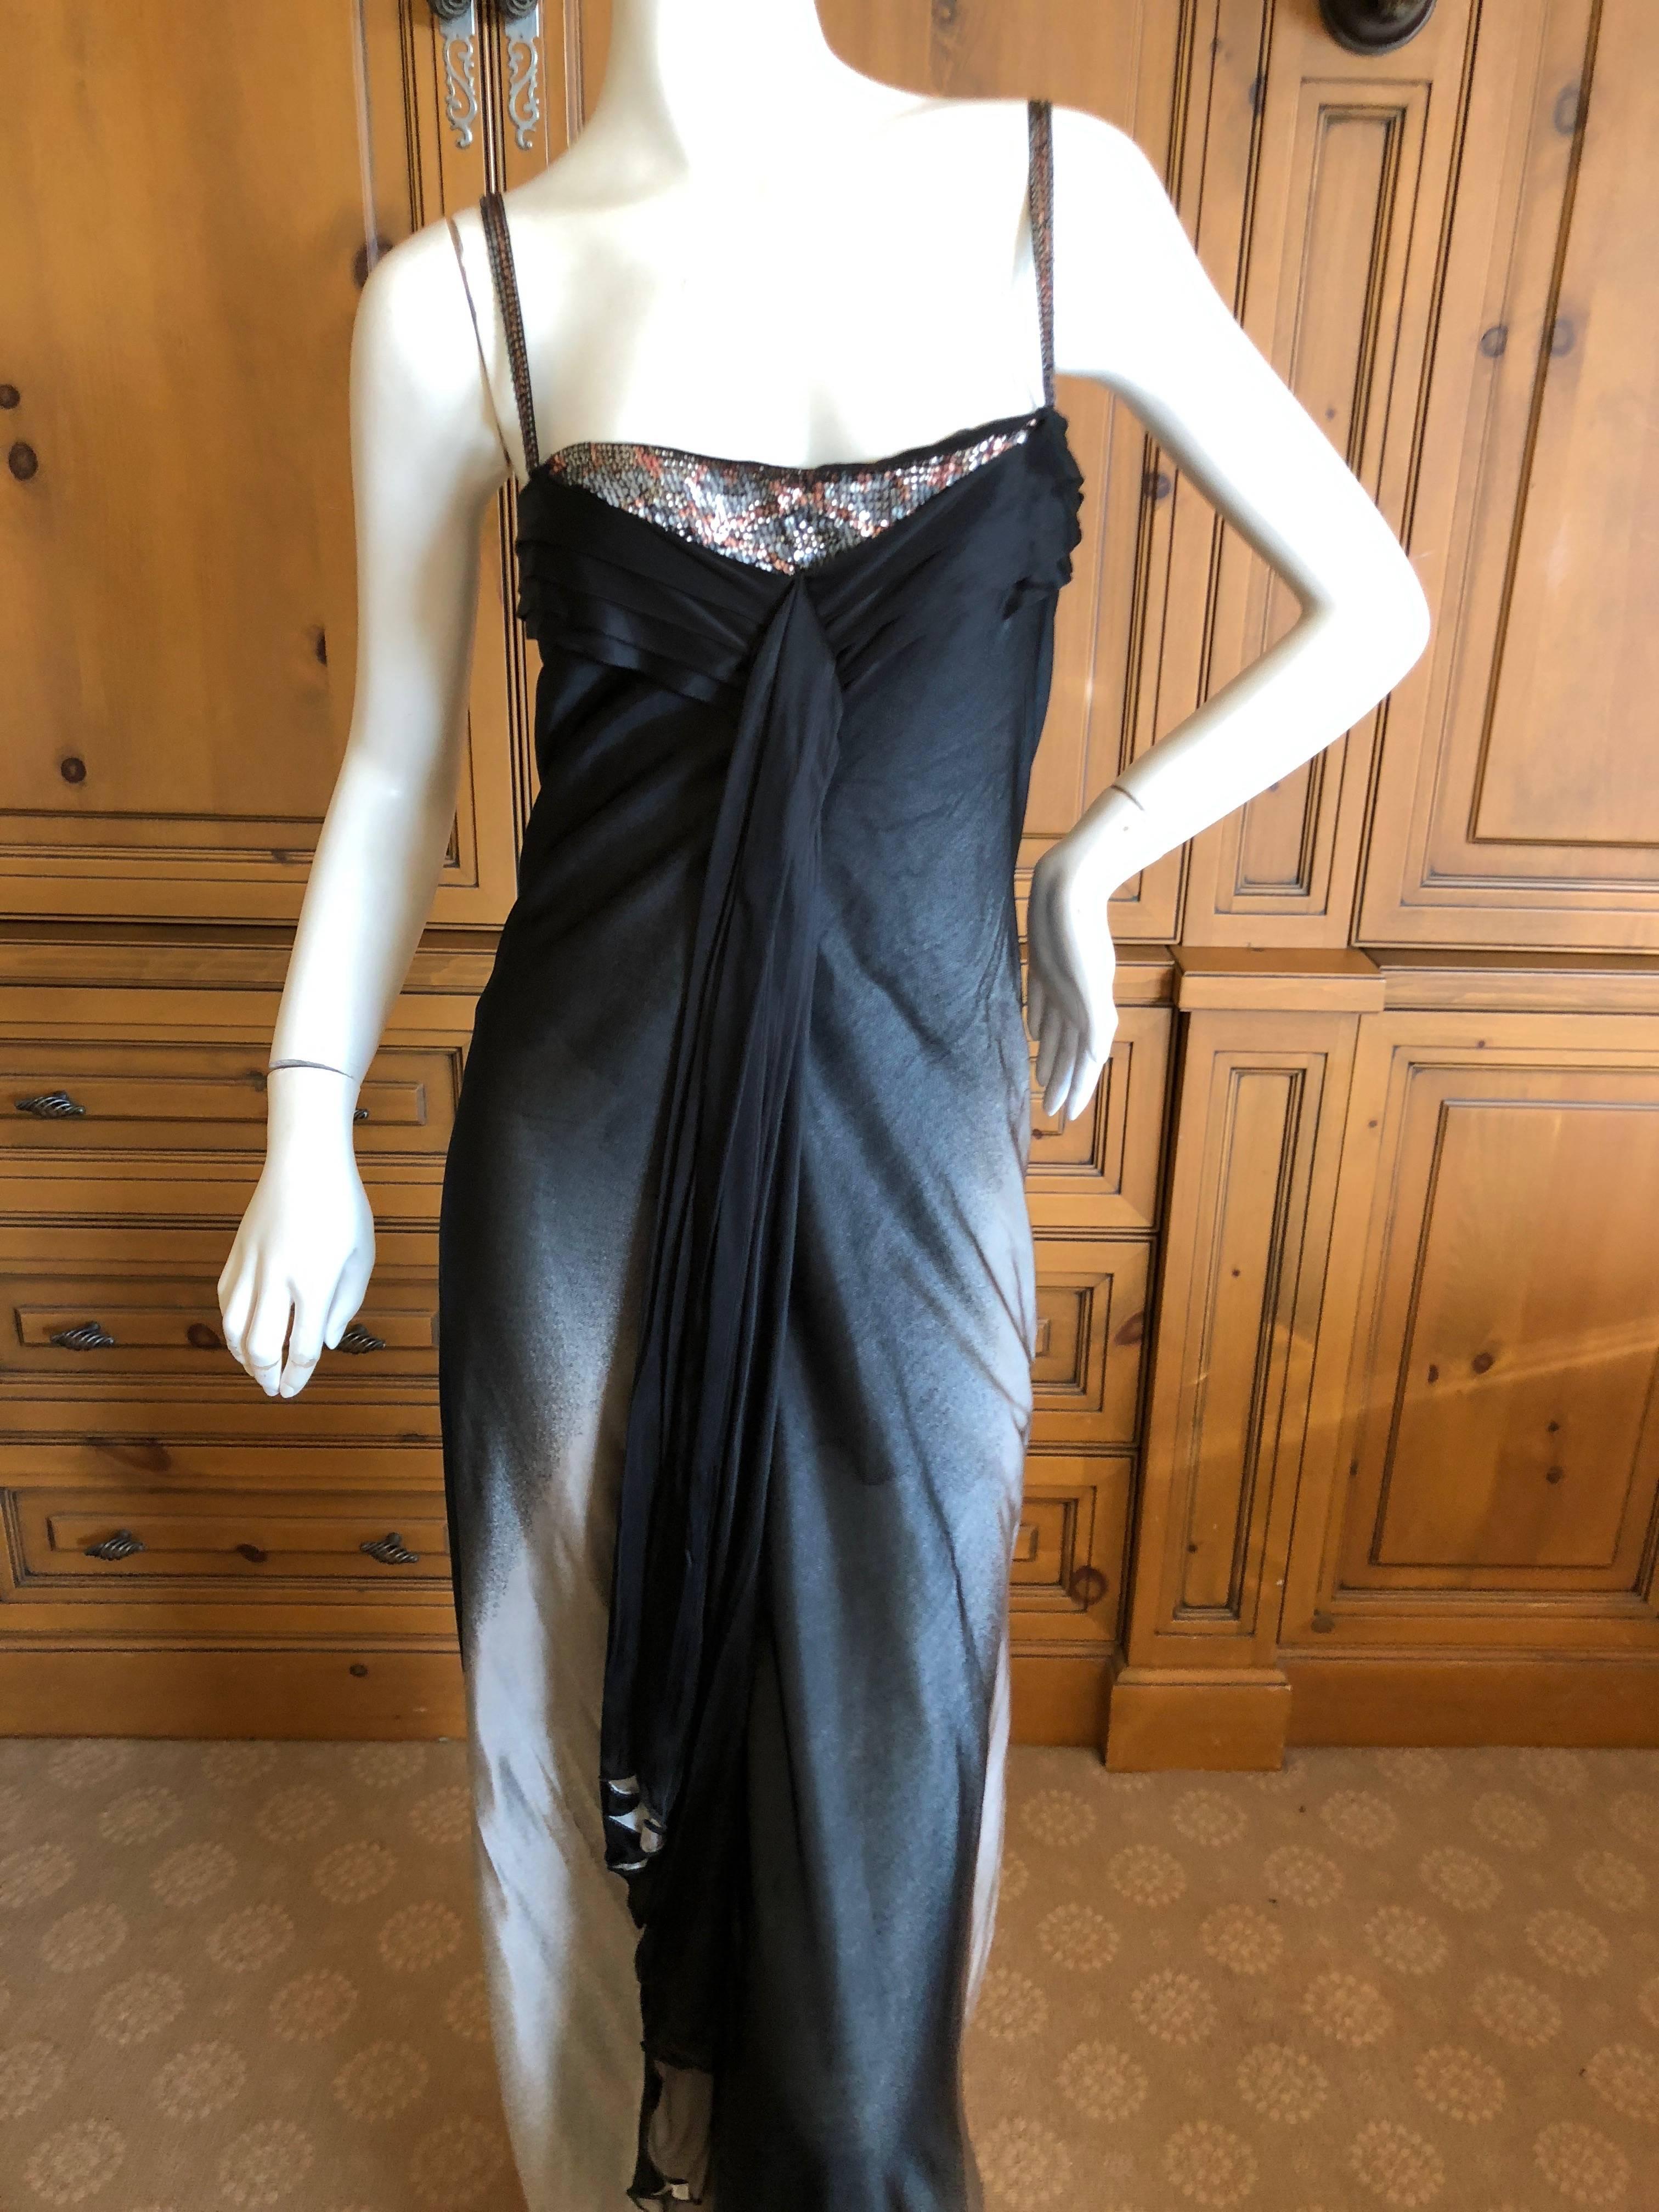 Christian Lacroix Silver and Black Vintage Silk Evening Dress with Sequin Detail For Sale 4